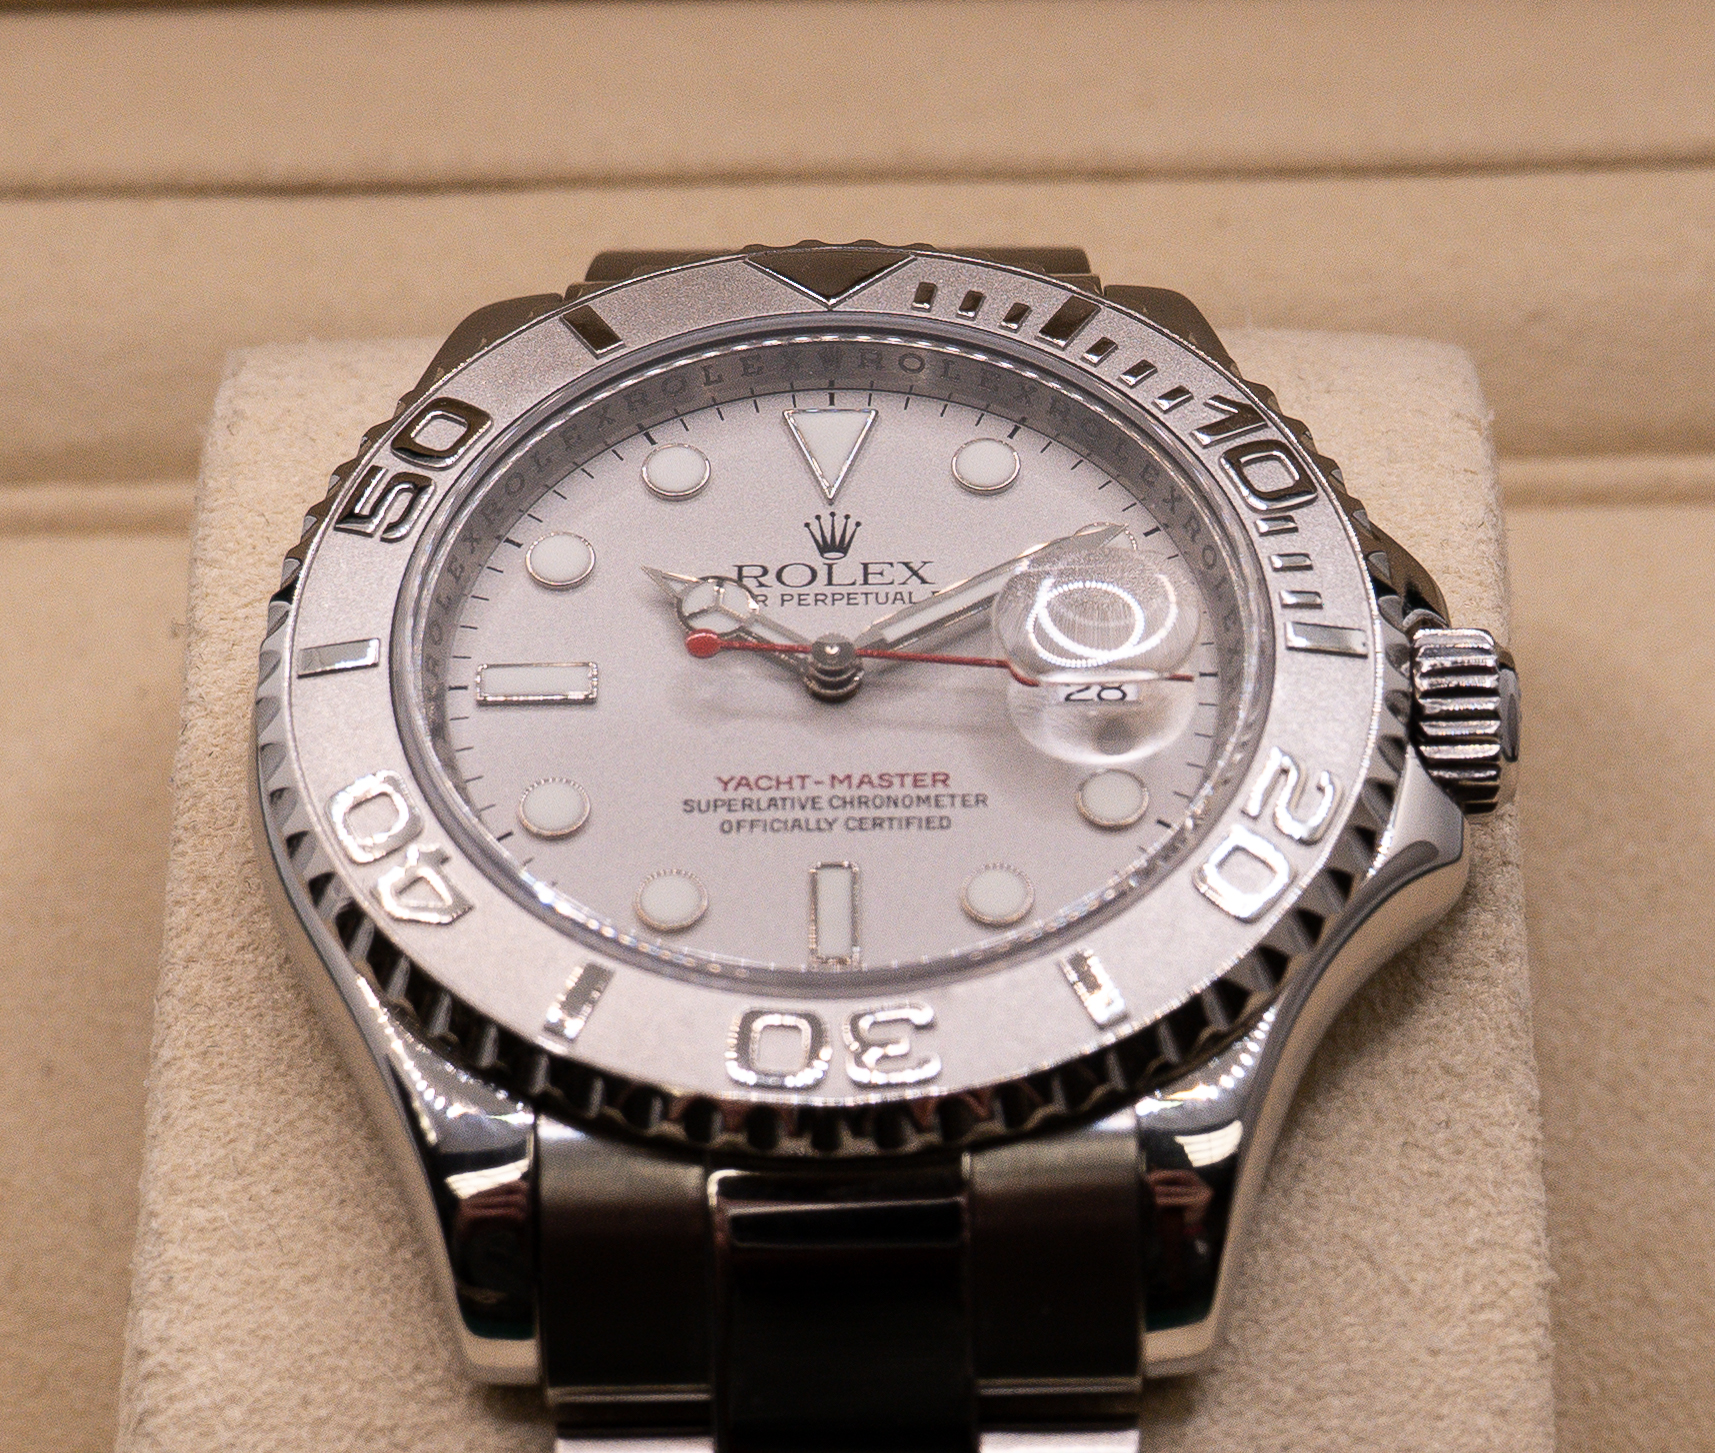 At TopNotch Watch, we have a wide selection of Rolex watches available to residents of NYC and beyond.